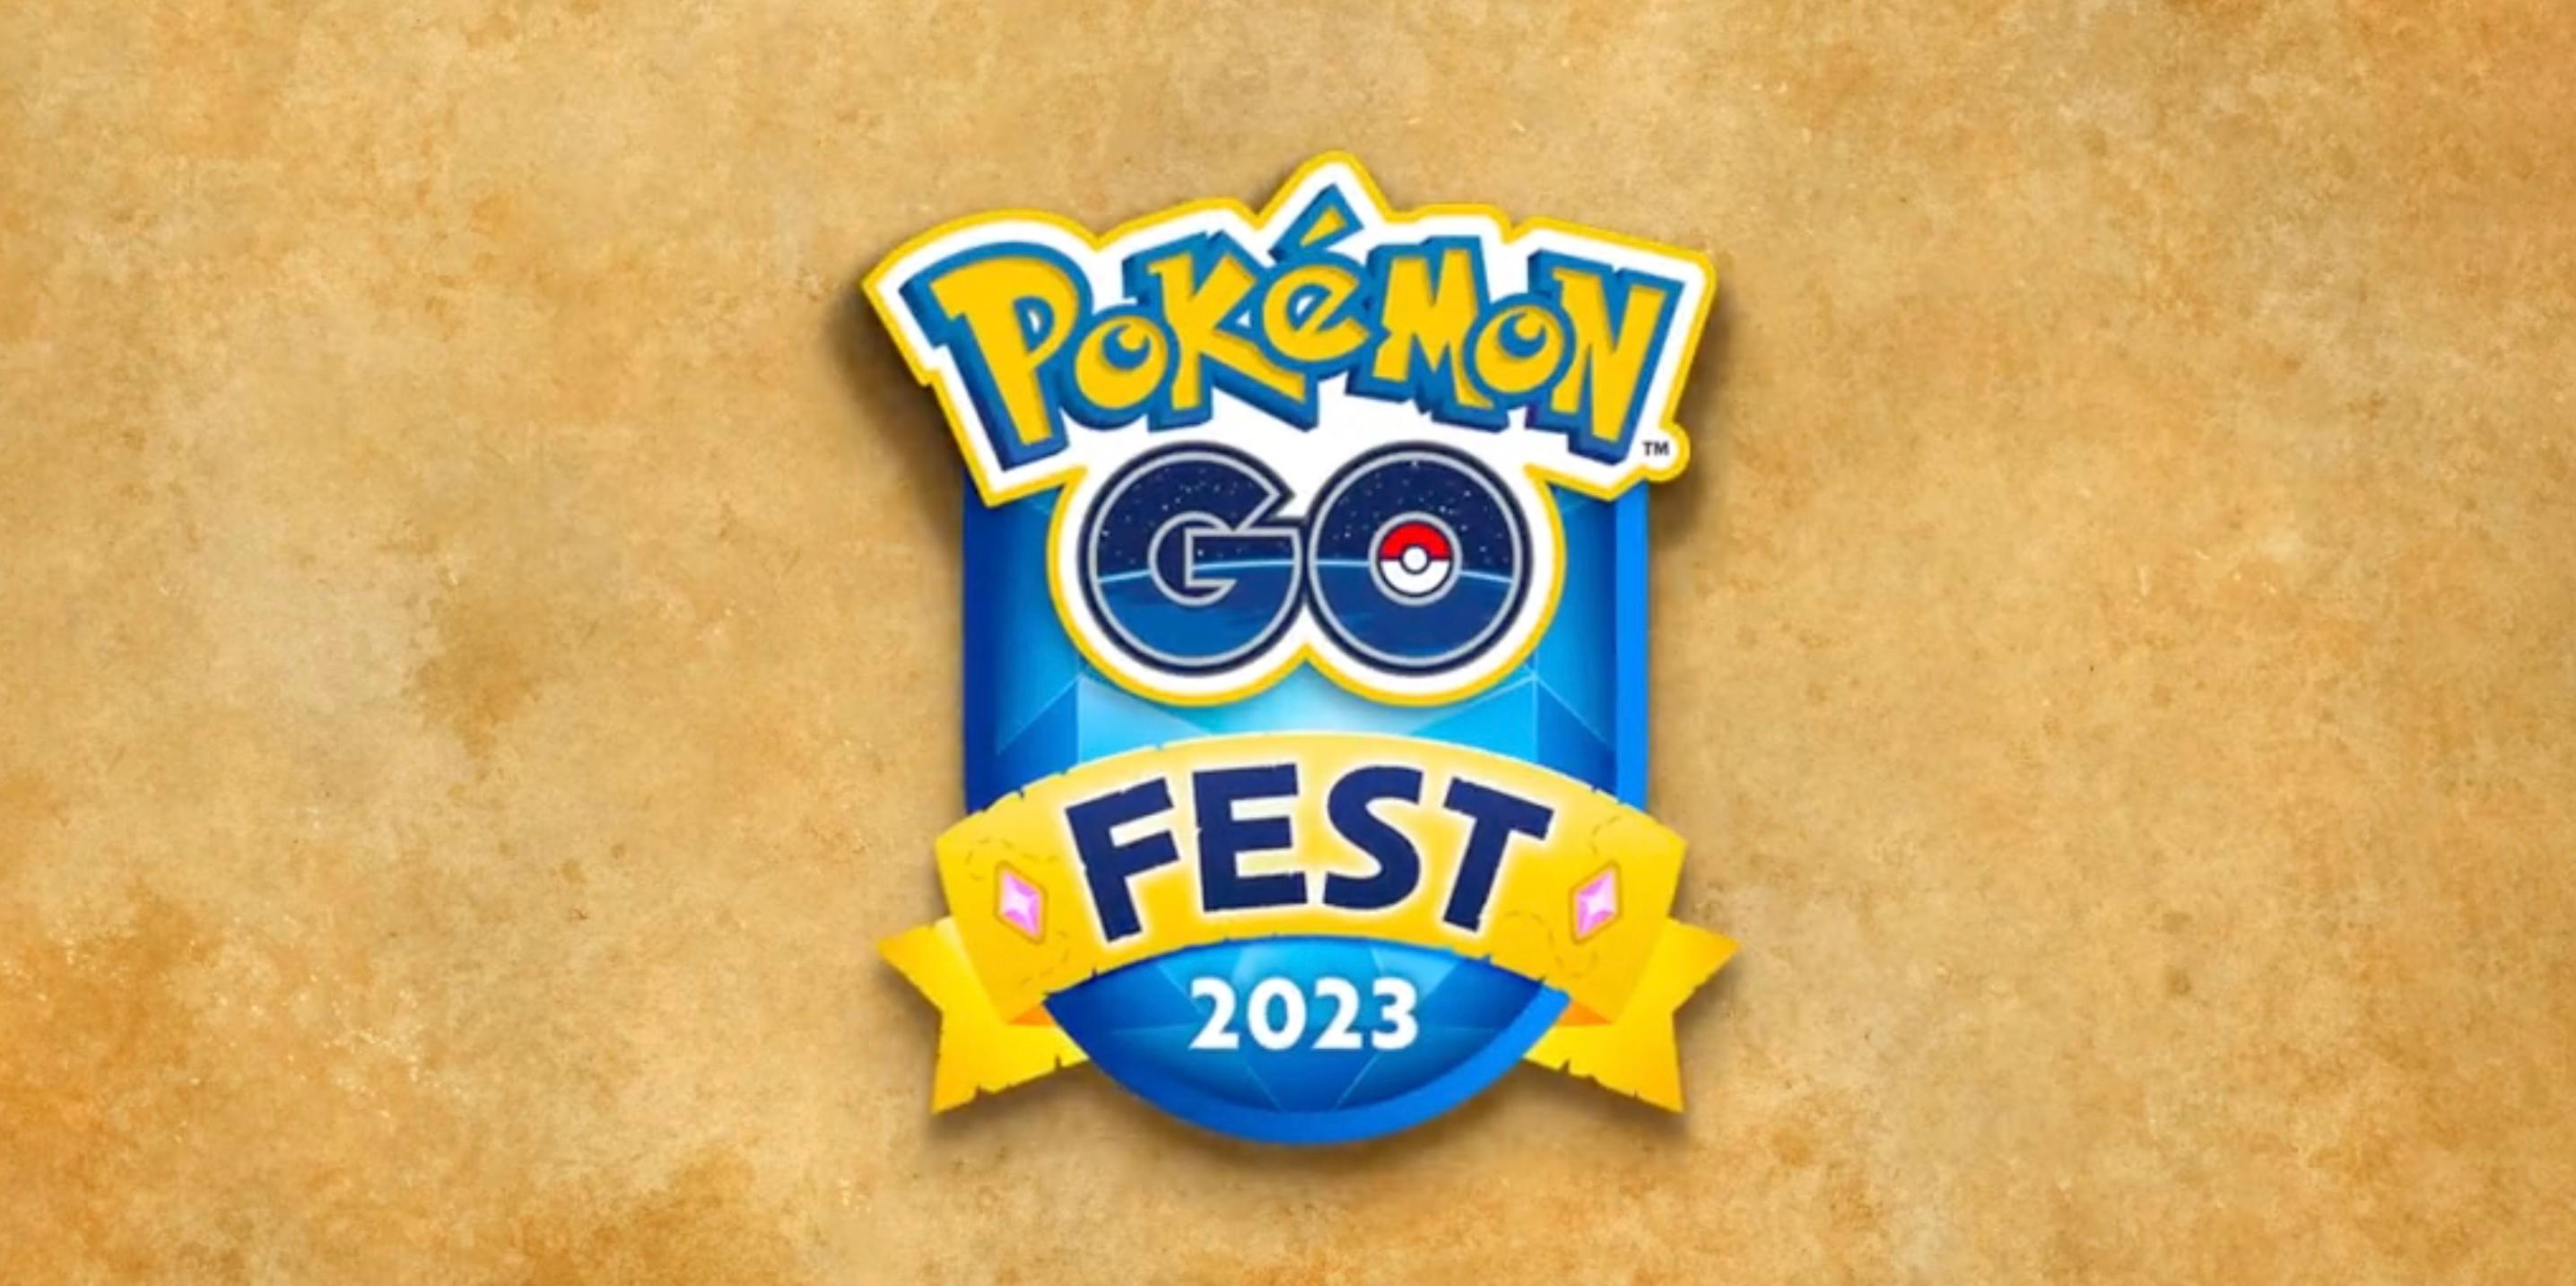 Pokémon GO Fest 2021 might be coming to a city near you!